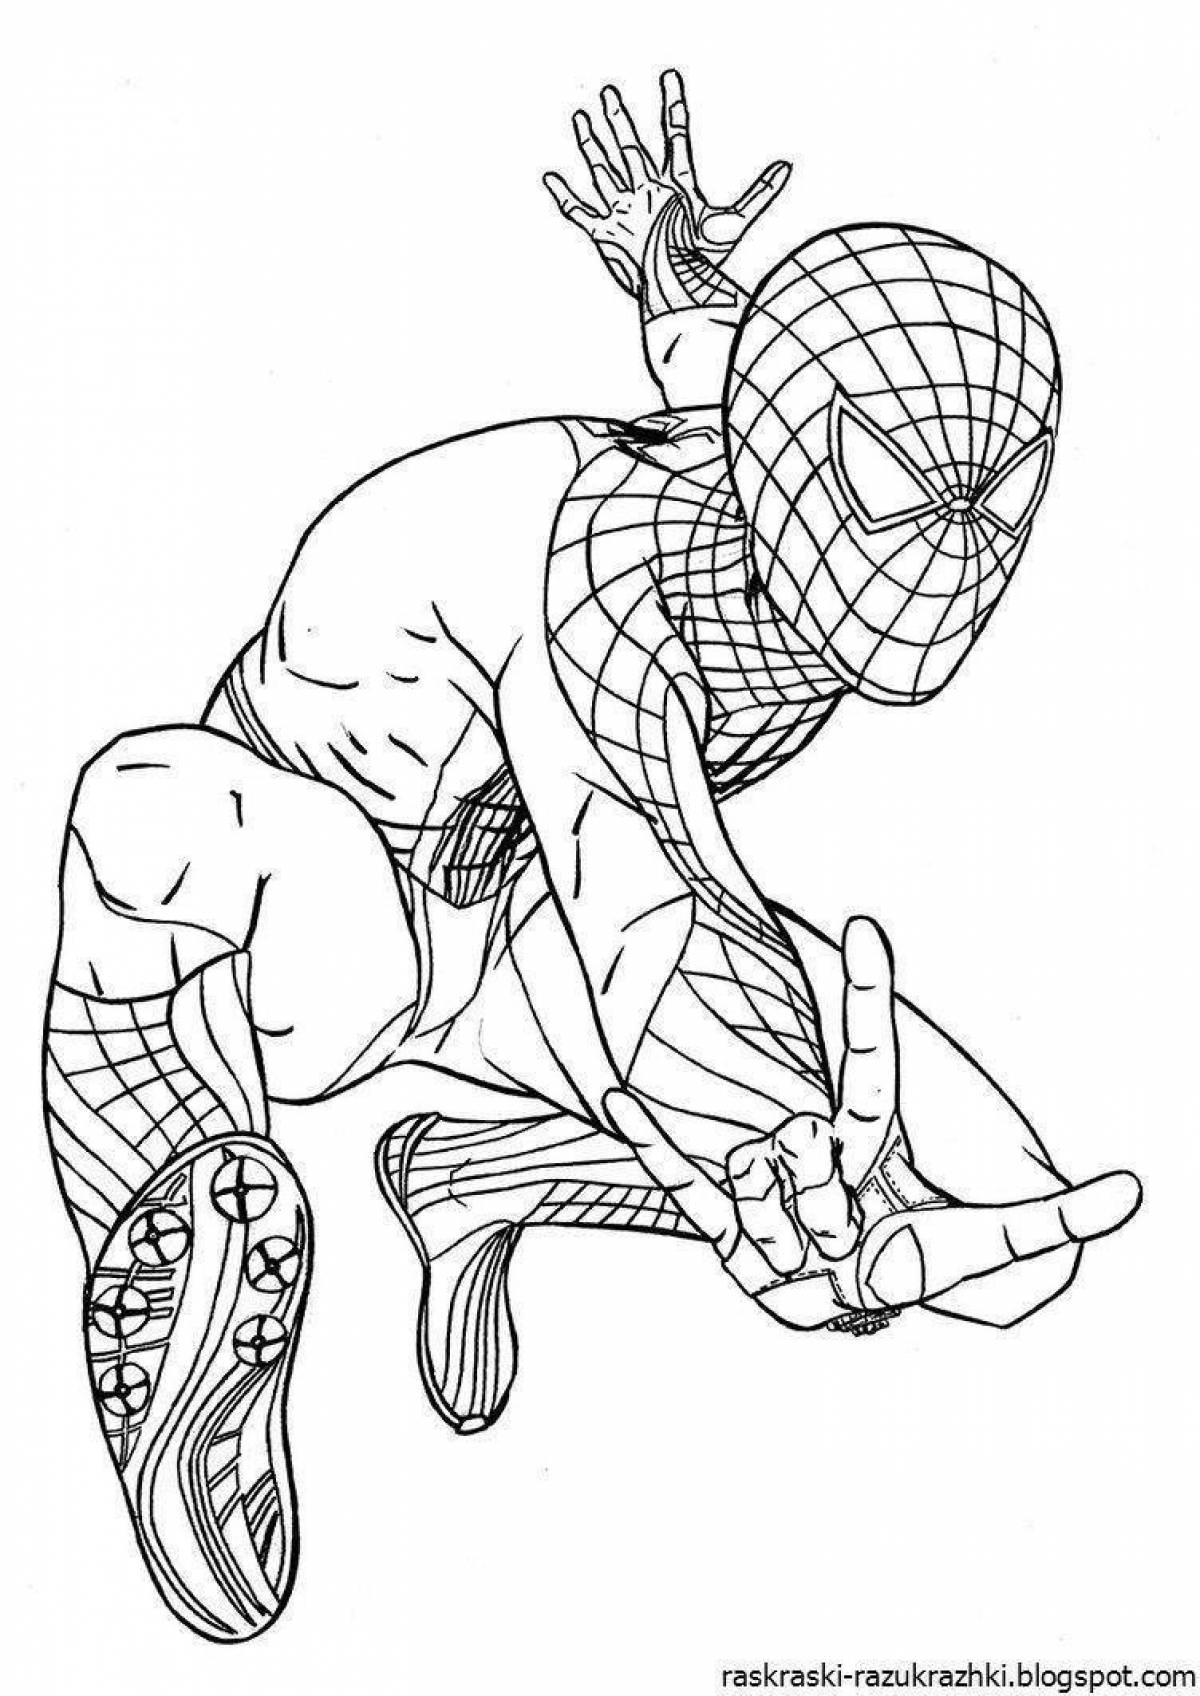 Spiderman's brightly colored coloring page